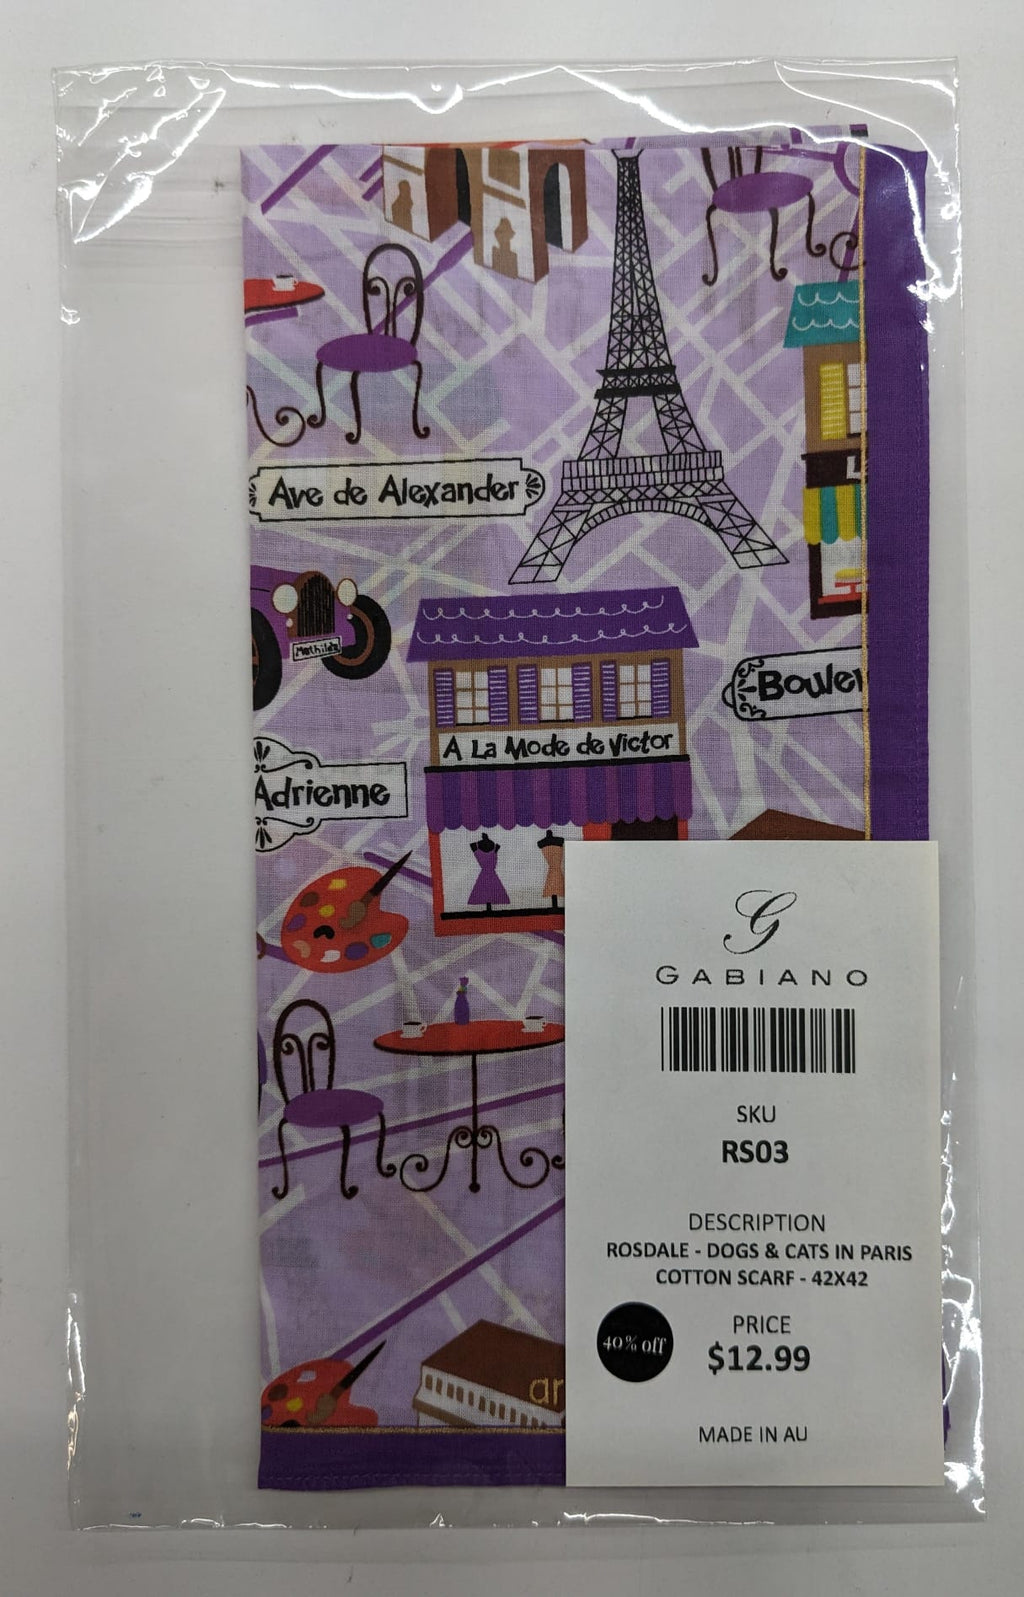 Rosdale - Dogs & Cats in Paris cotton scarf - RS03